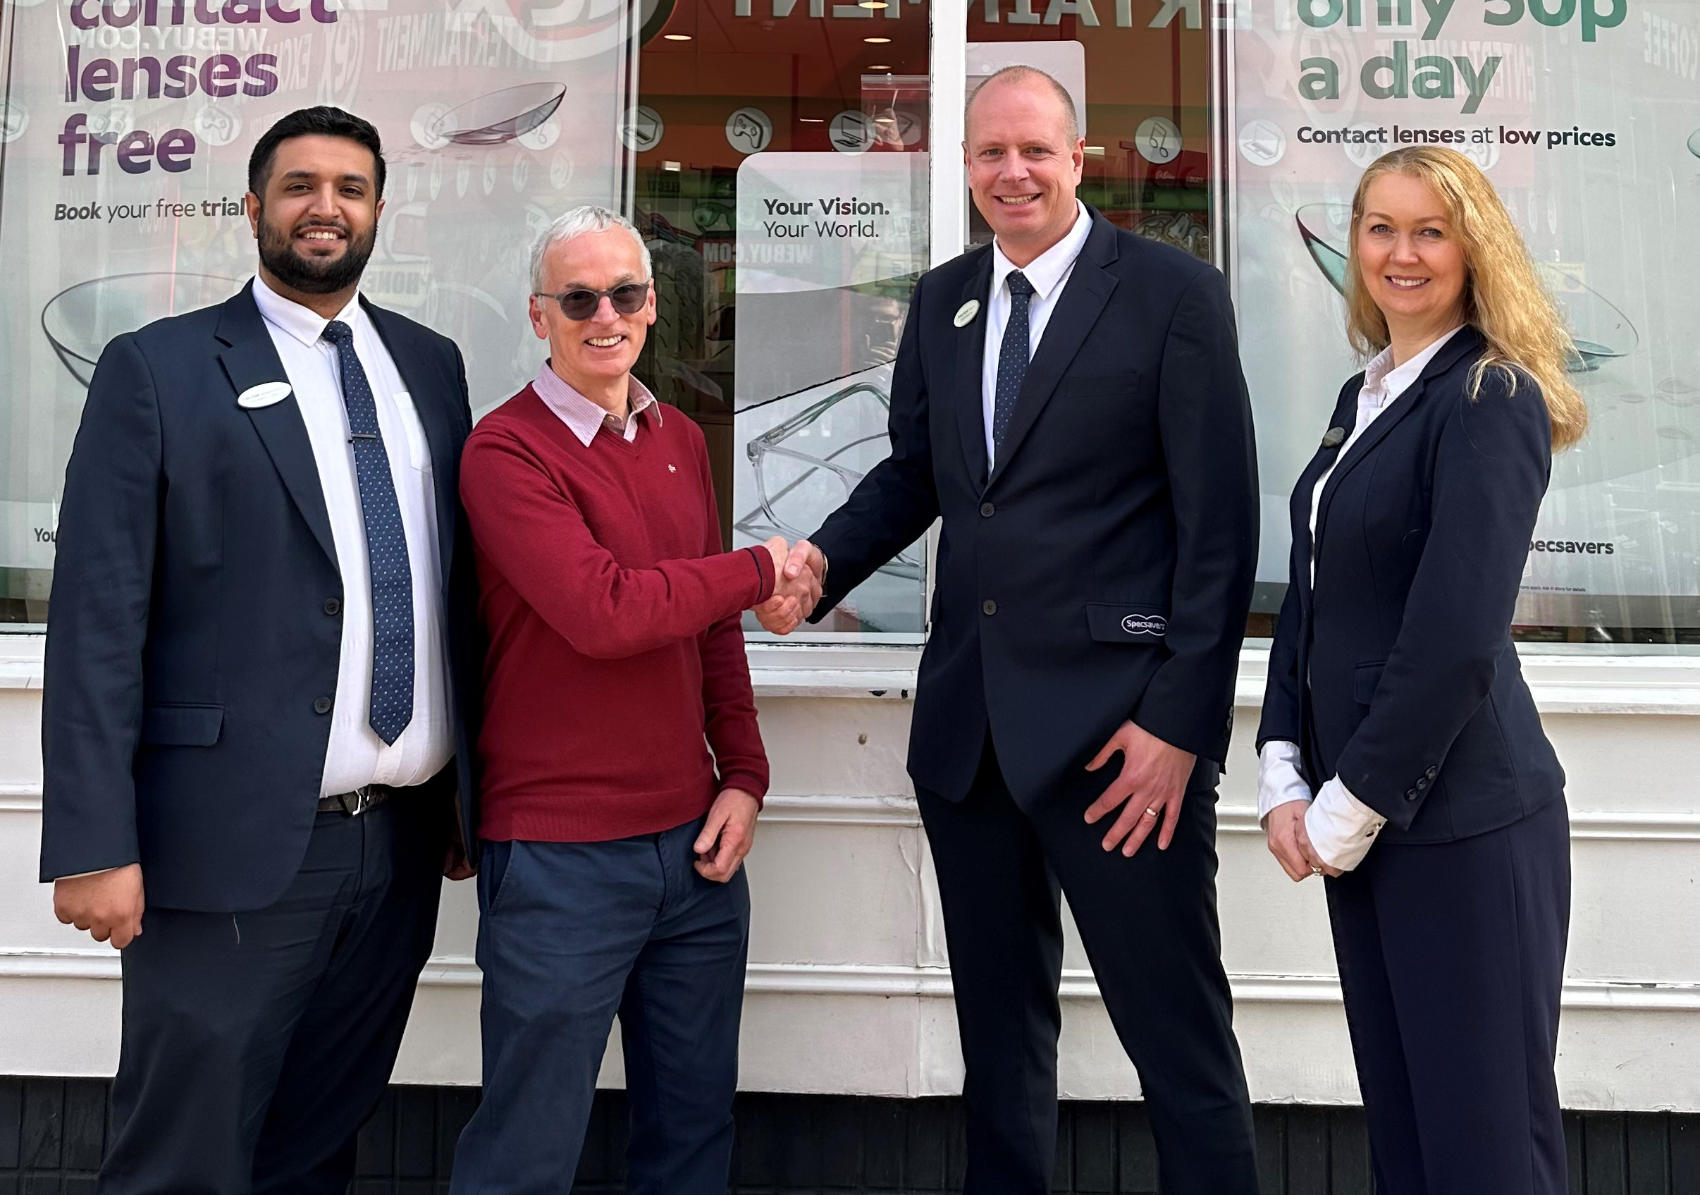 Harrogate Specsavers Robert May retirement and Andy Bryer return